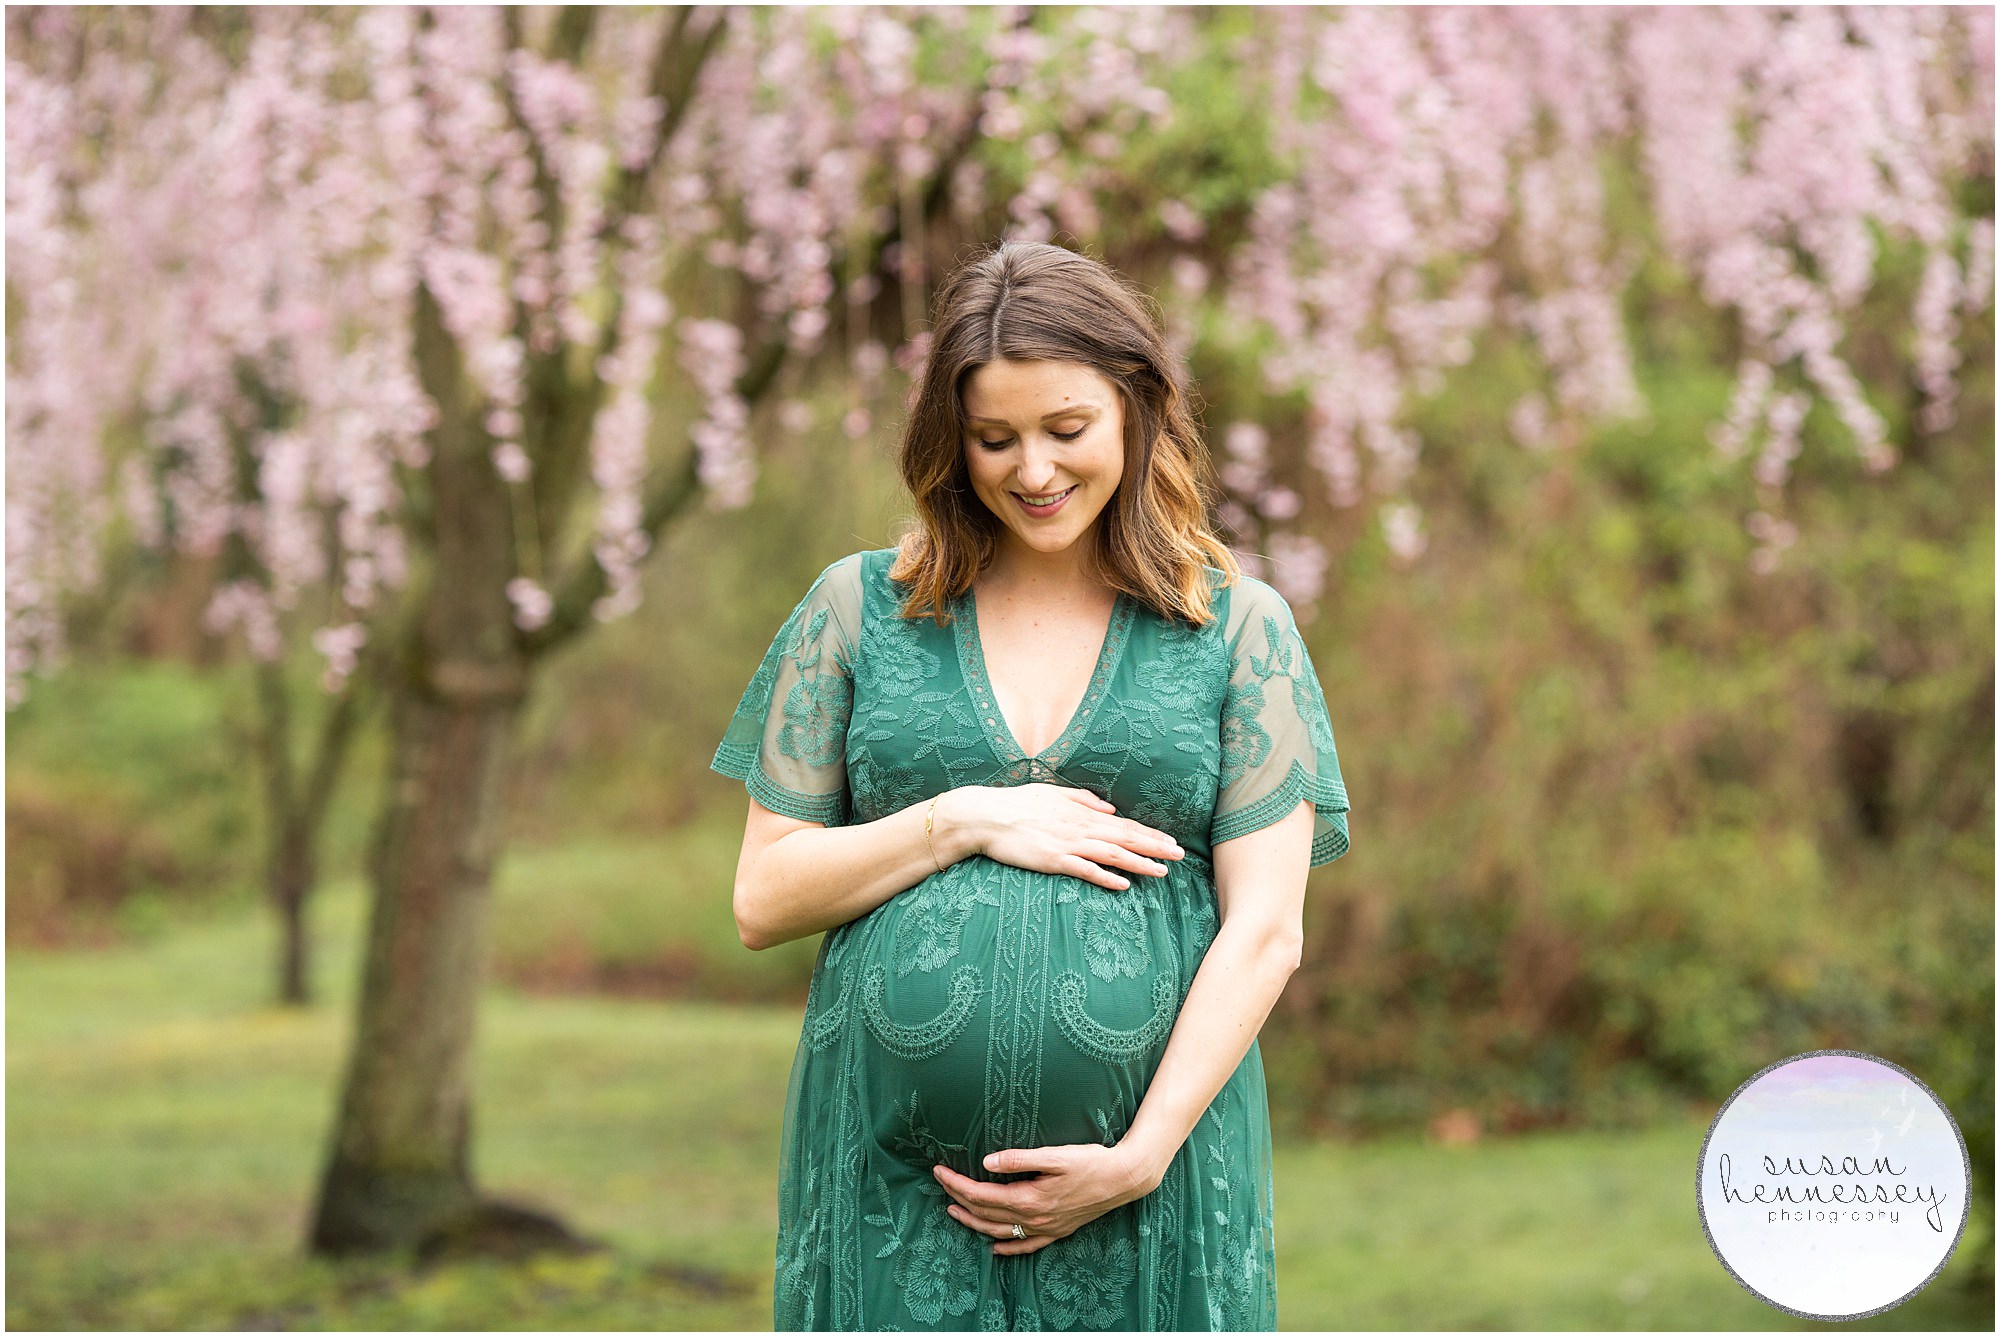 Maternity photography session at Barclay Farmstead in cherry hill, NJ